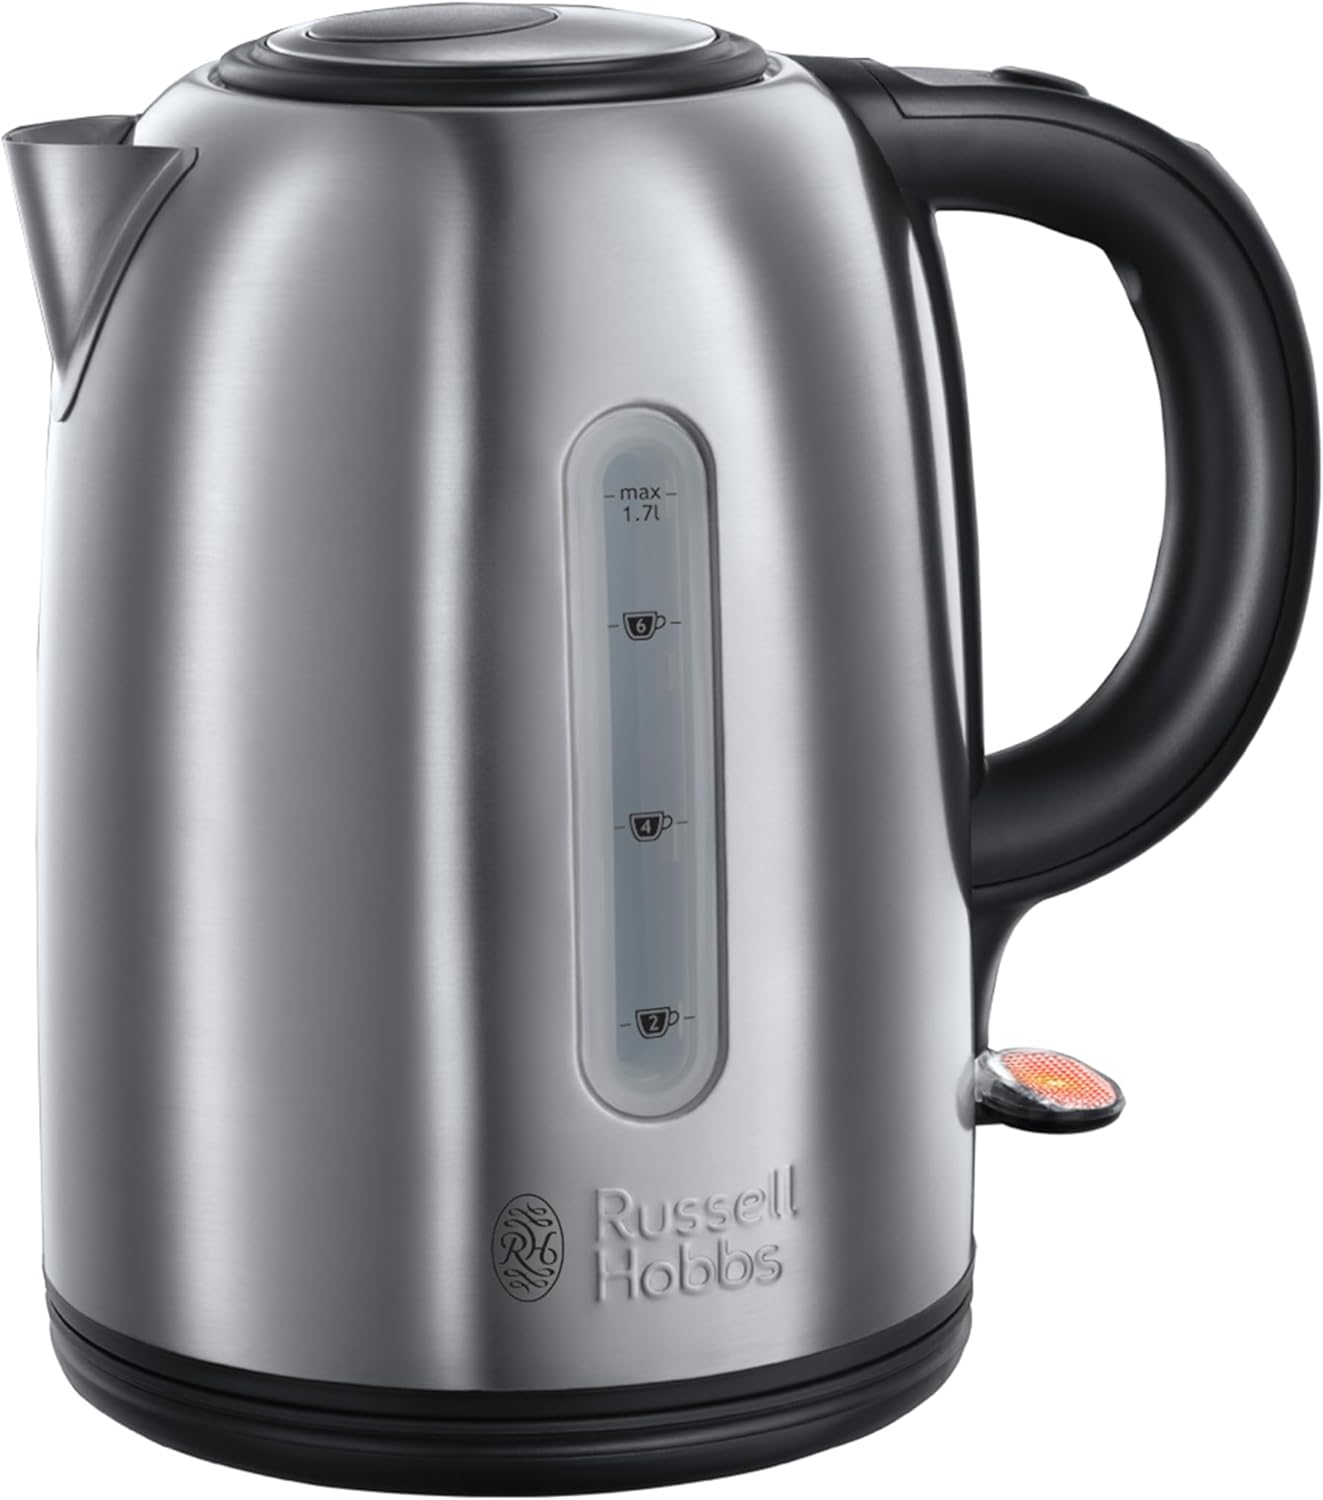 Russell Hobbs Brushed Stainless Steel & Black Electric 1.7L Cordless Kettle-9246U